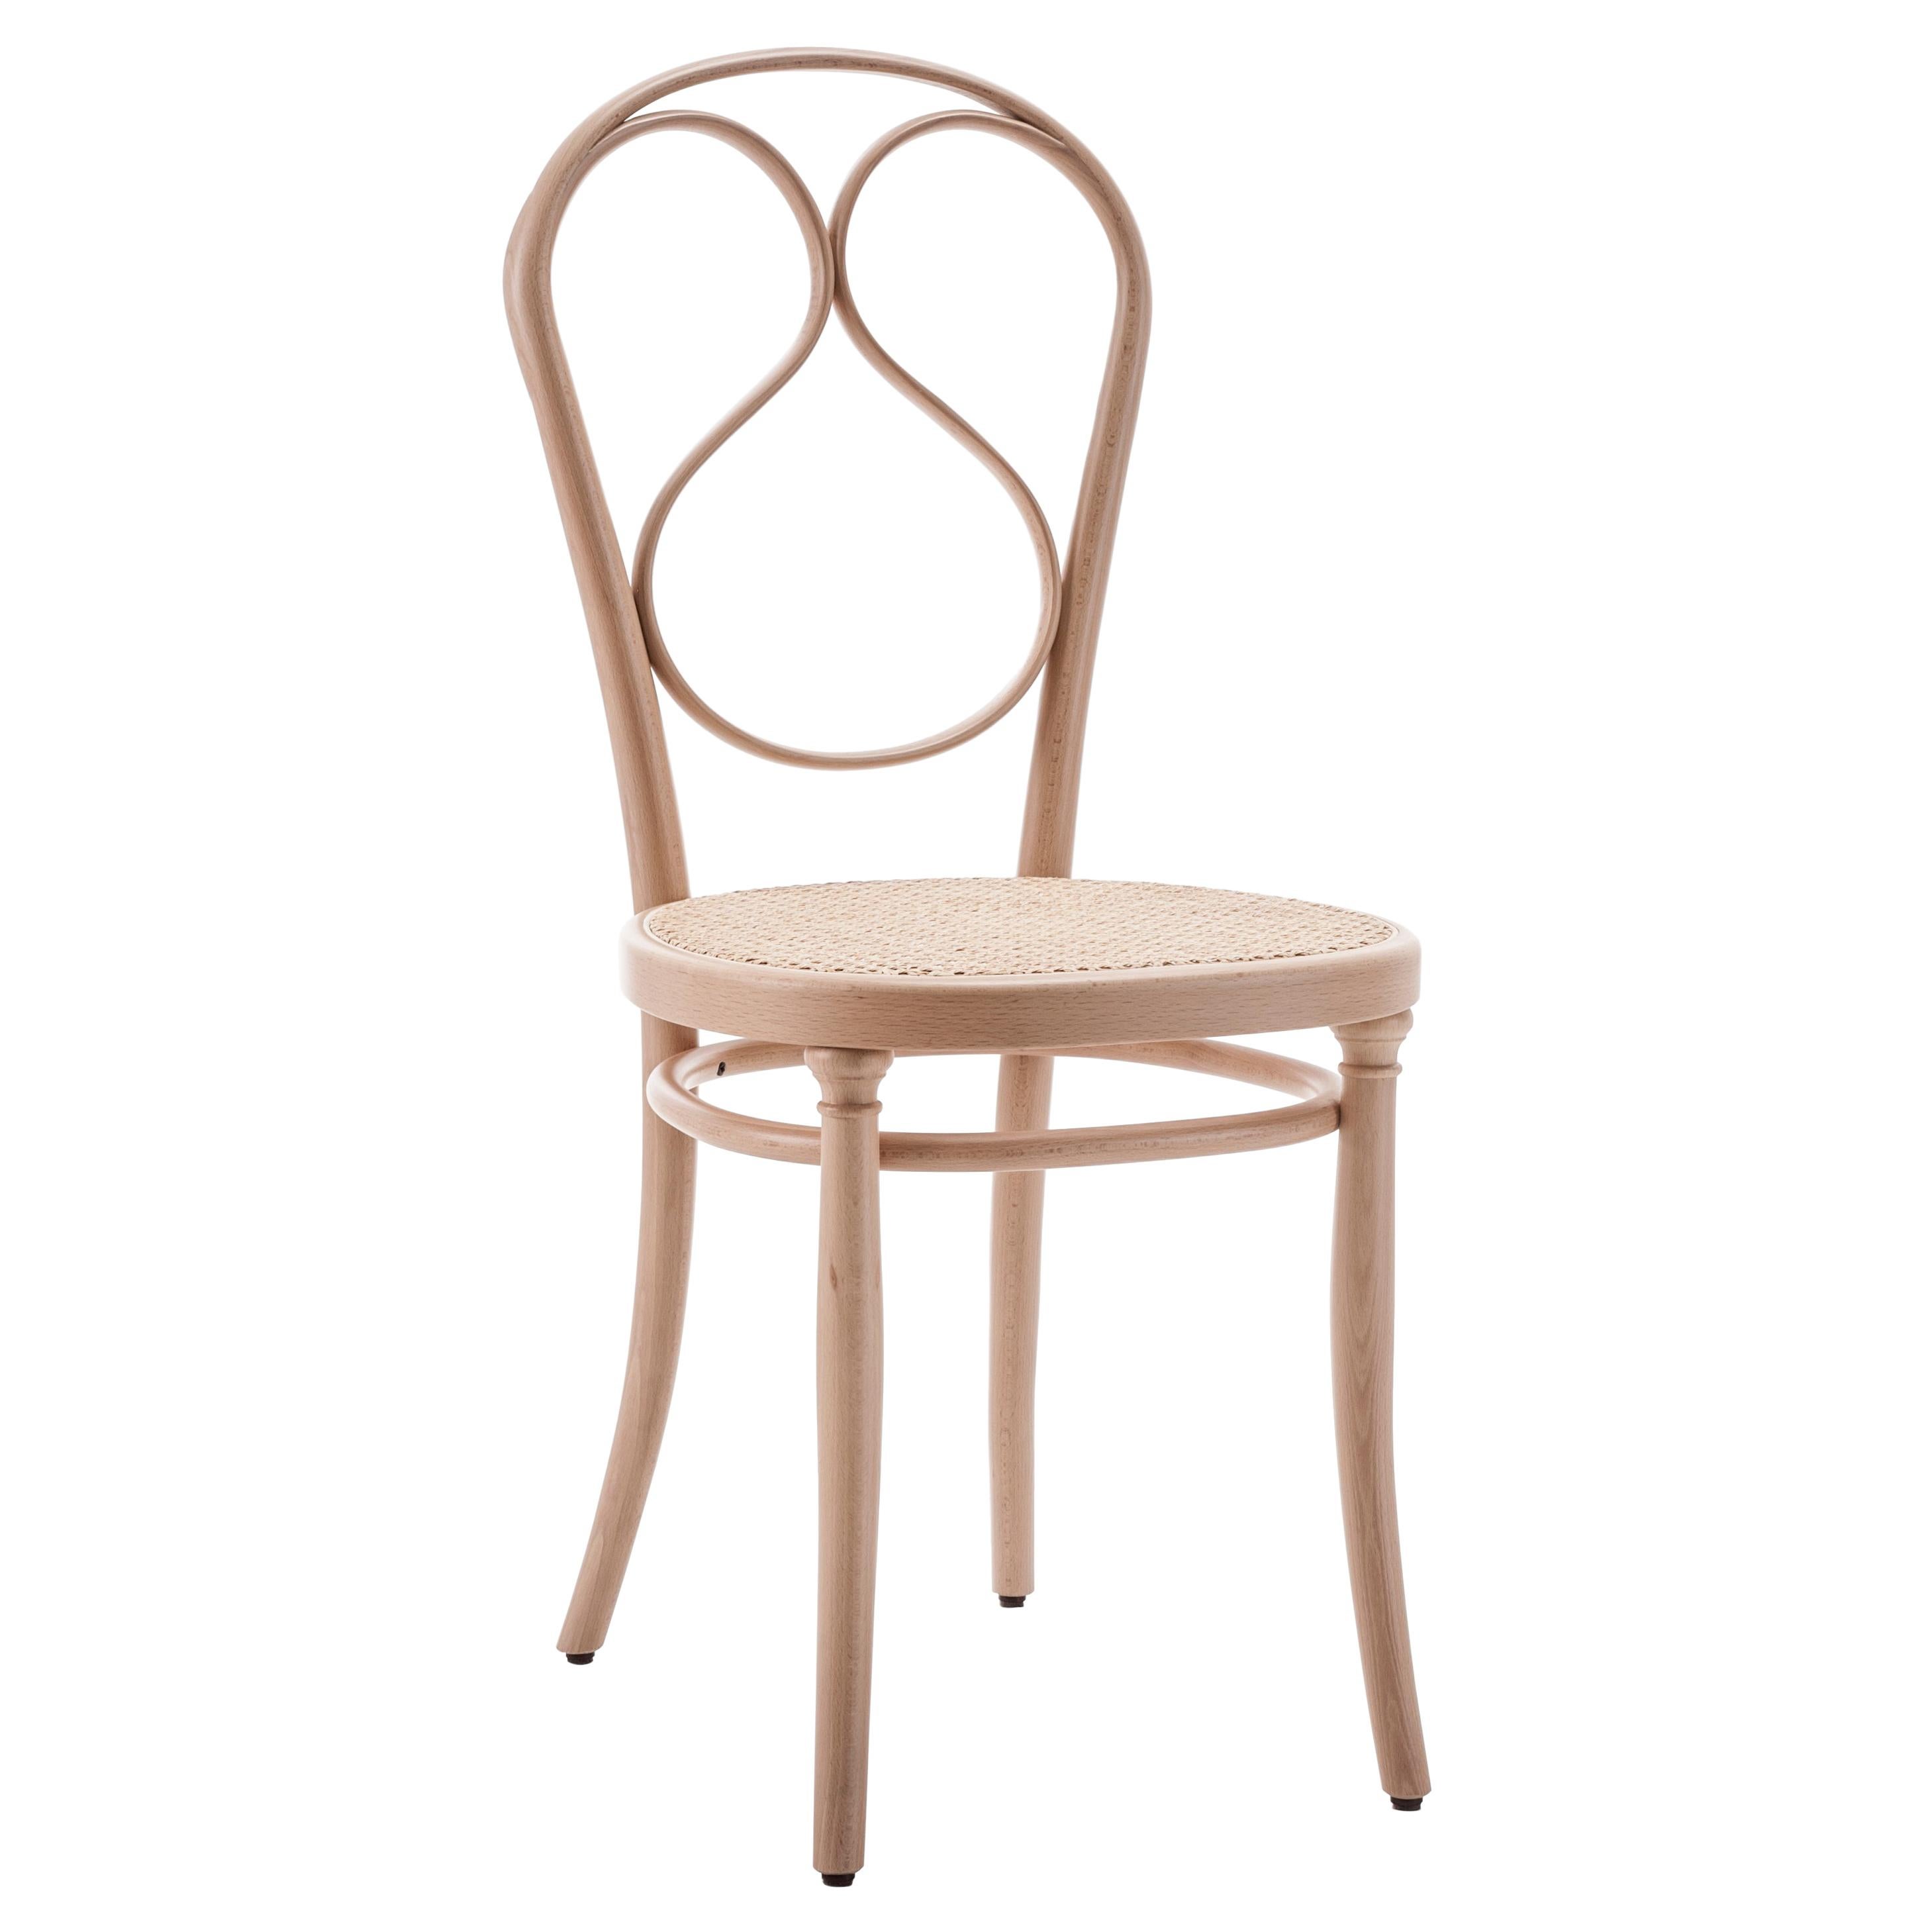 Gebrüder Thonet Vienna GmbH N.1 Chair in Beechwood with Cane Seat For Sale